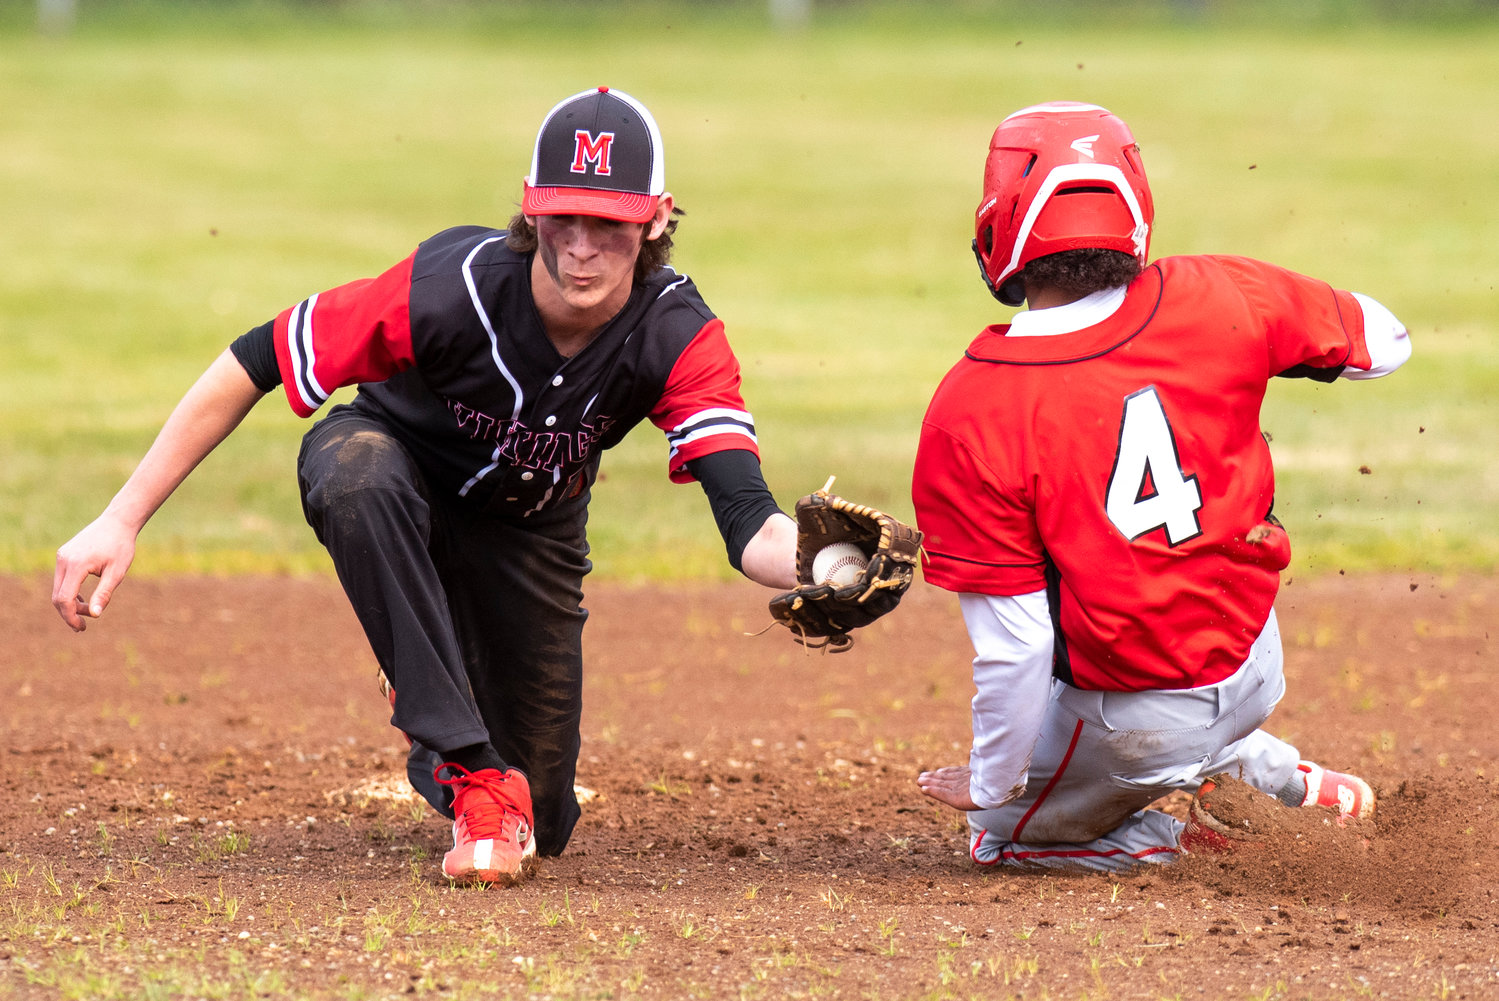 Mossyrock shortstop Gunner Mulligan, left, catches a throw to second as an Oakville baserunner slides into second base during a game in Chehalis VIllage on April 28.